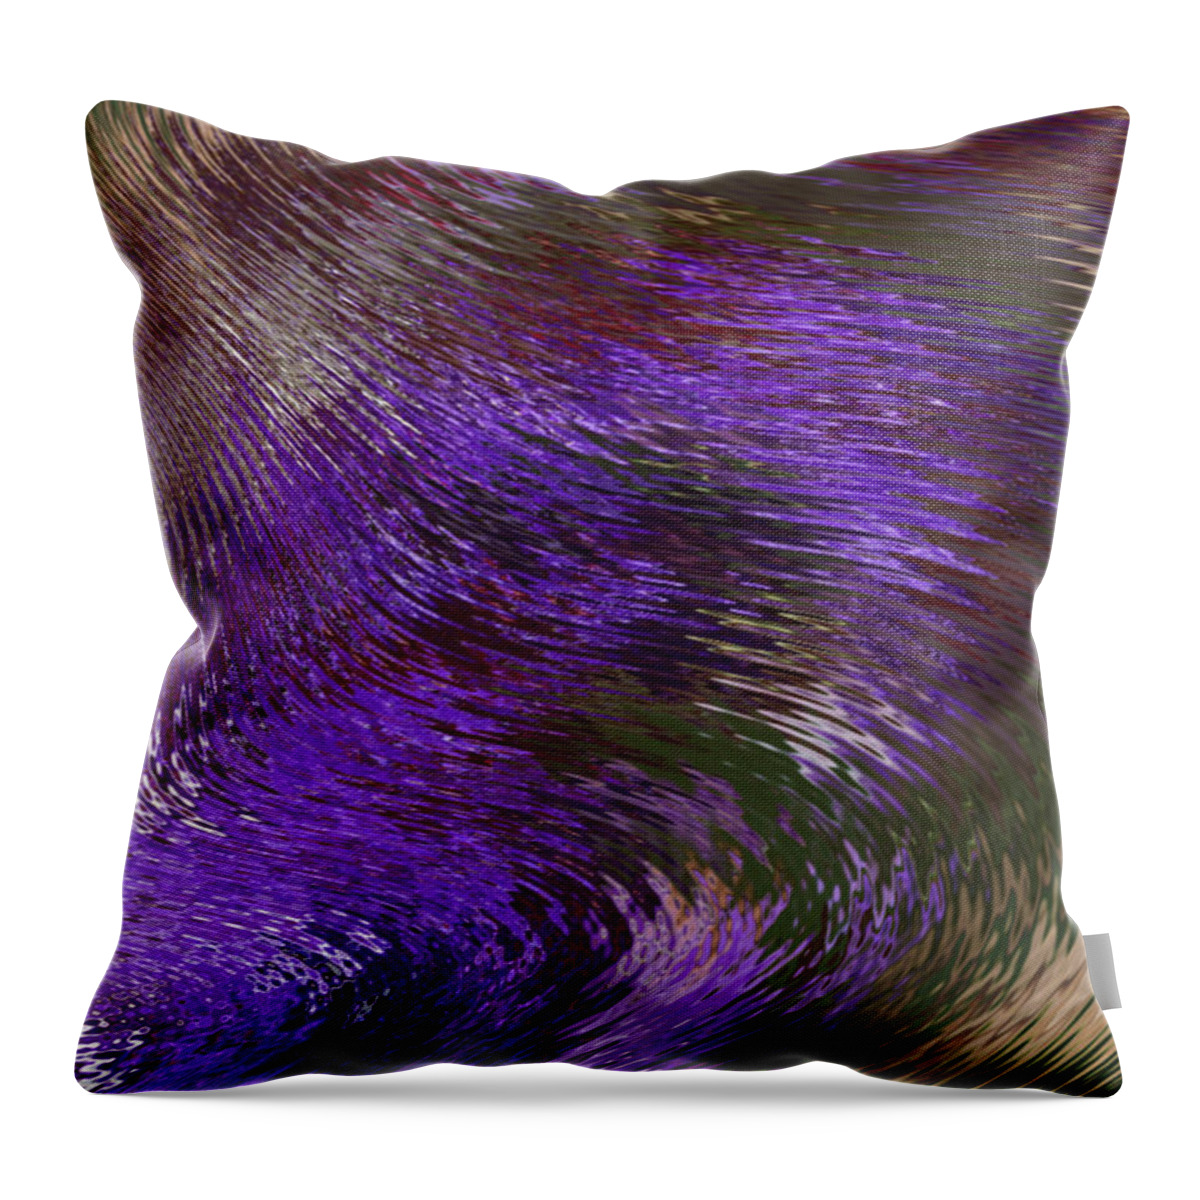 Swirls Of Life 4 Throw Pillow featuring the digital art Swirls of Life 4 by Ernest Echols